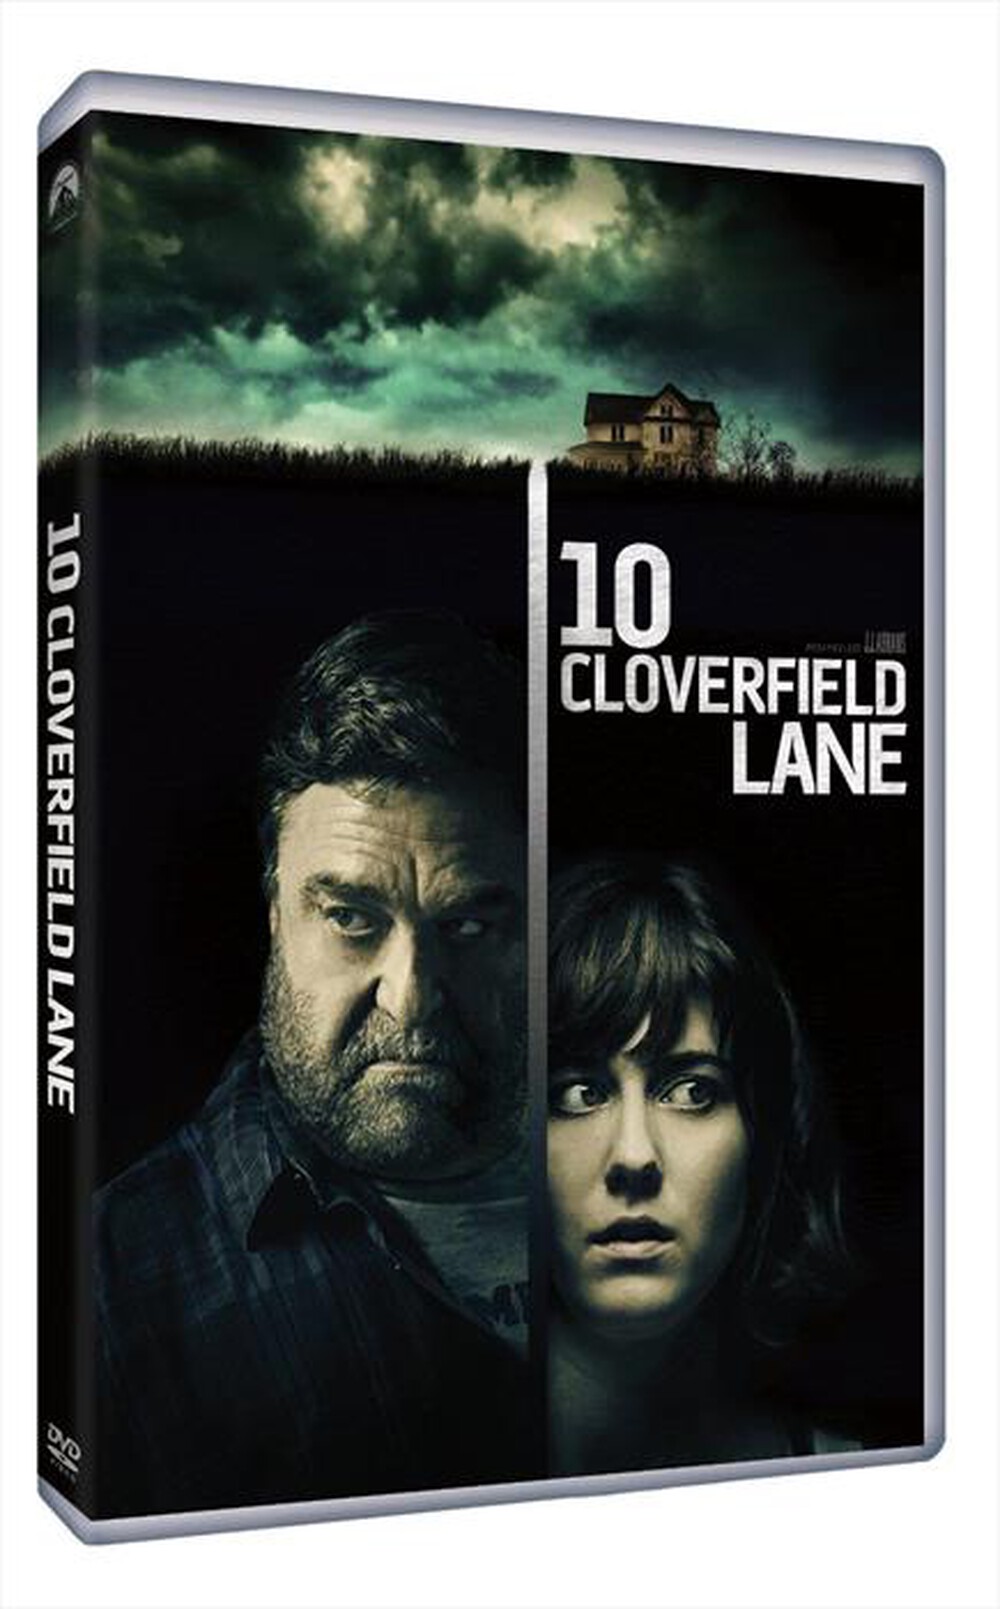 "UNIVERSAL PICTURES - 10 Cloverfield Lane - "